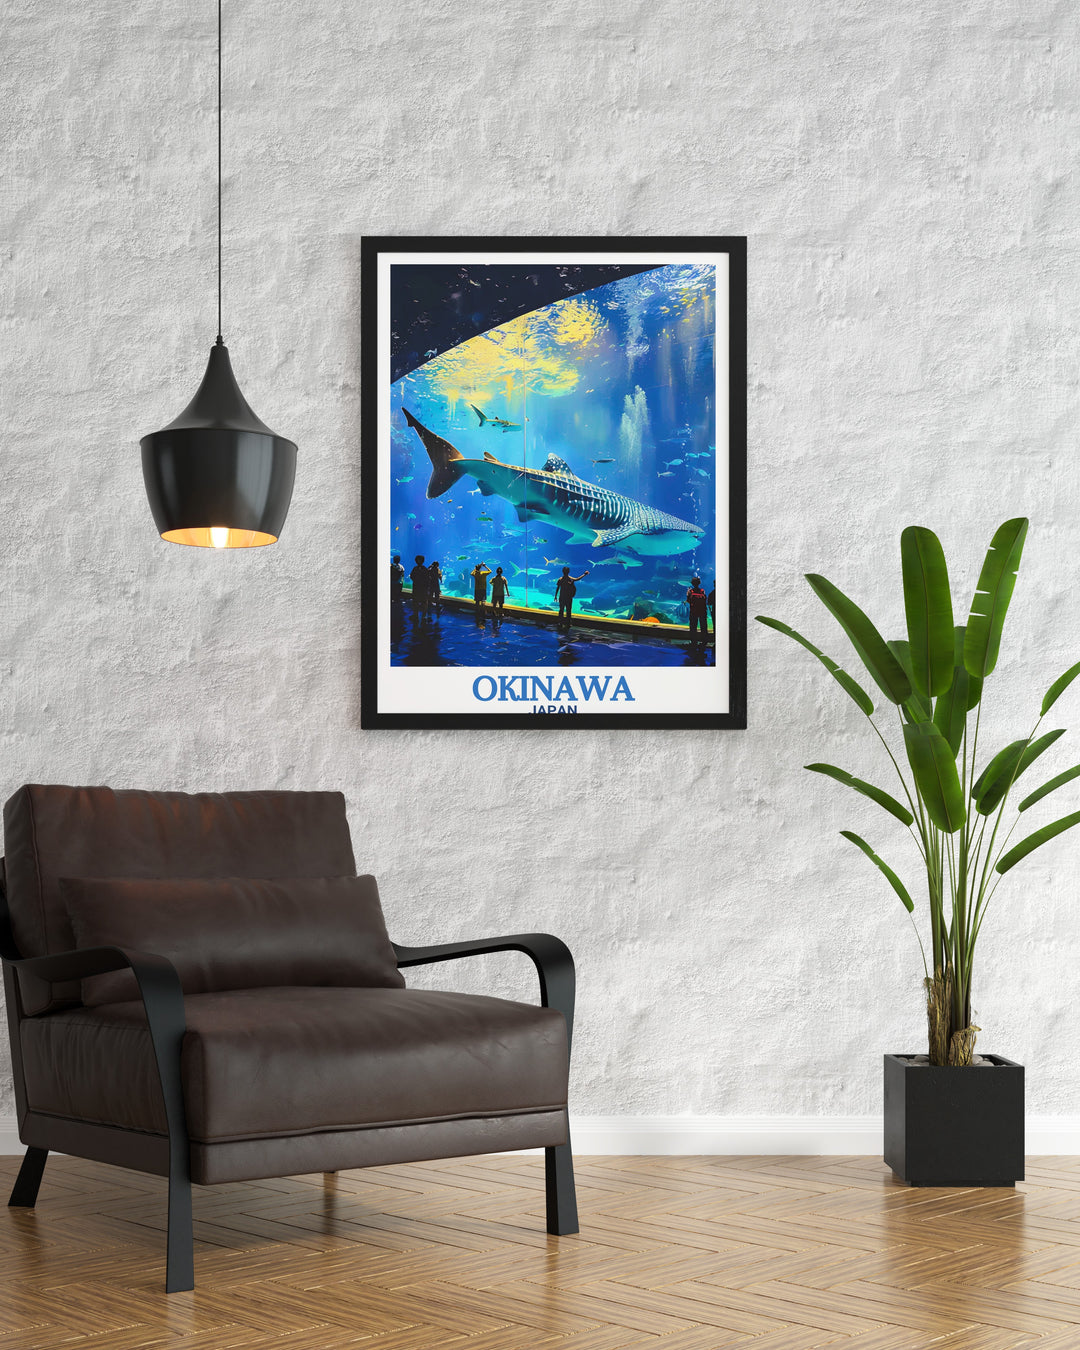 Beautiful Okinawa Churaumi Aquarium artwork showcasing the stunning underwater scenes of one of the worlds largest aquariums ideal for anyone who loves marine life and Japan prints